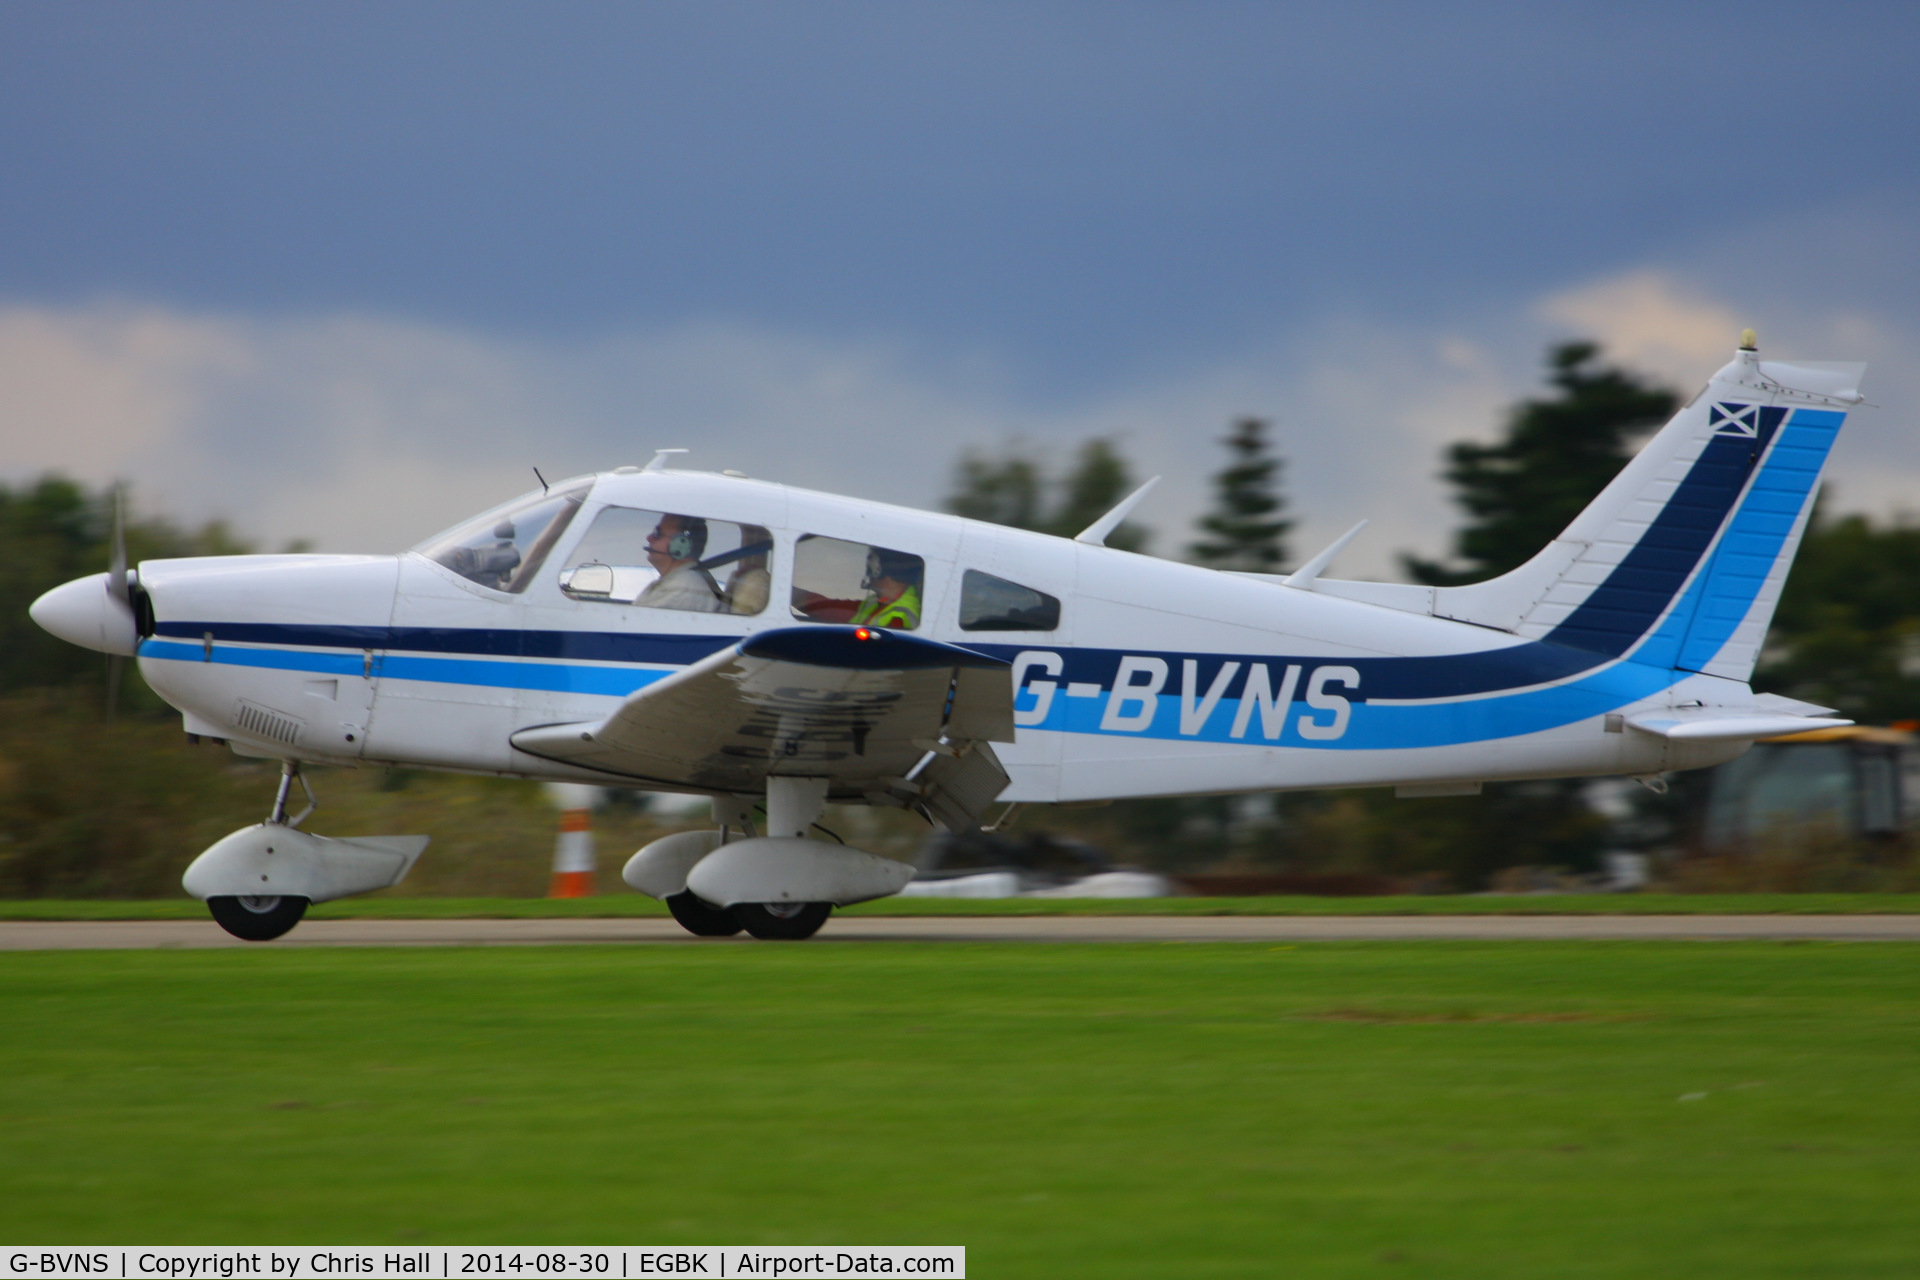 G-BVNS, 1976 Piper PA-28-181 Cherokee Archer II C/N 28-7690358, at the LAA Rally 2014, Sywell